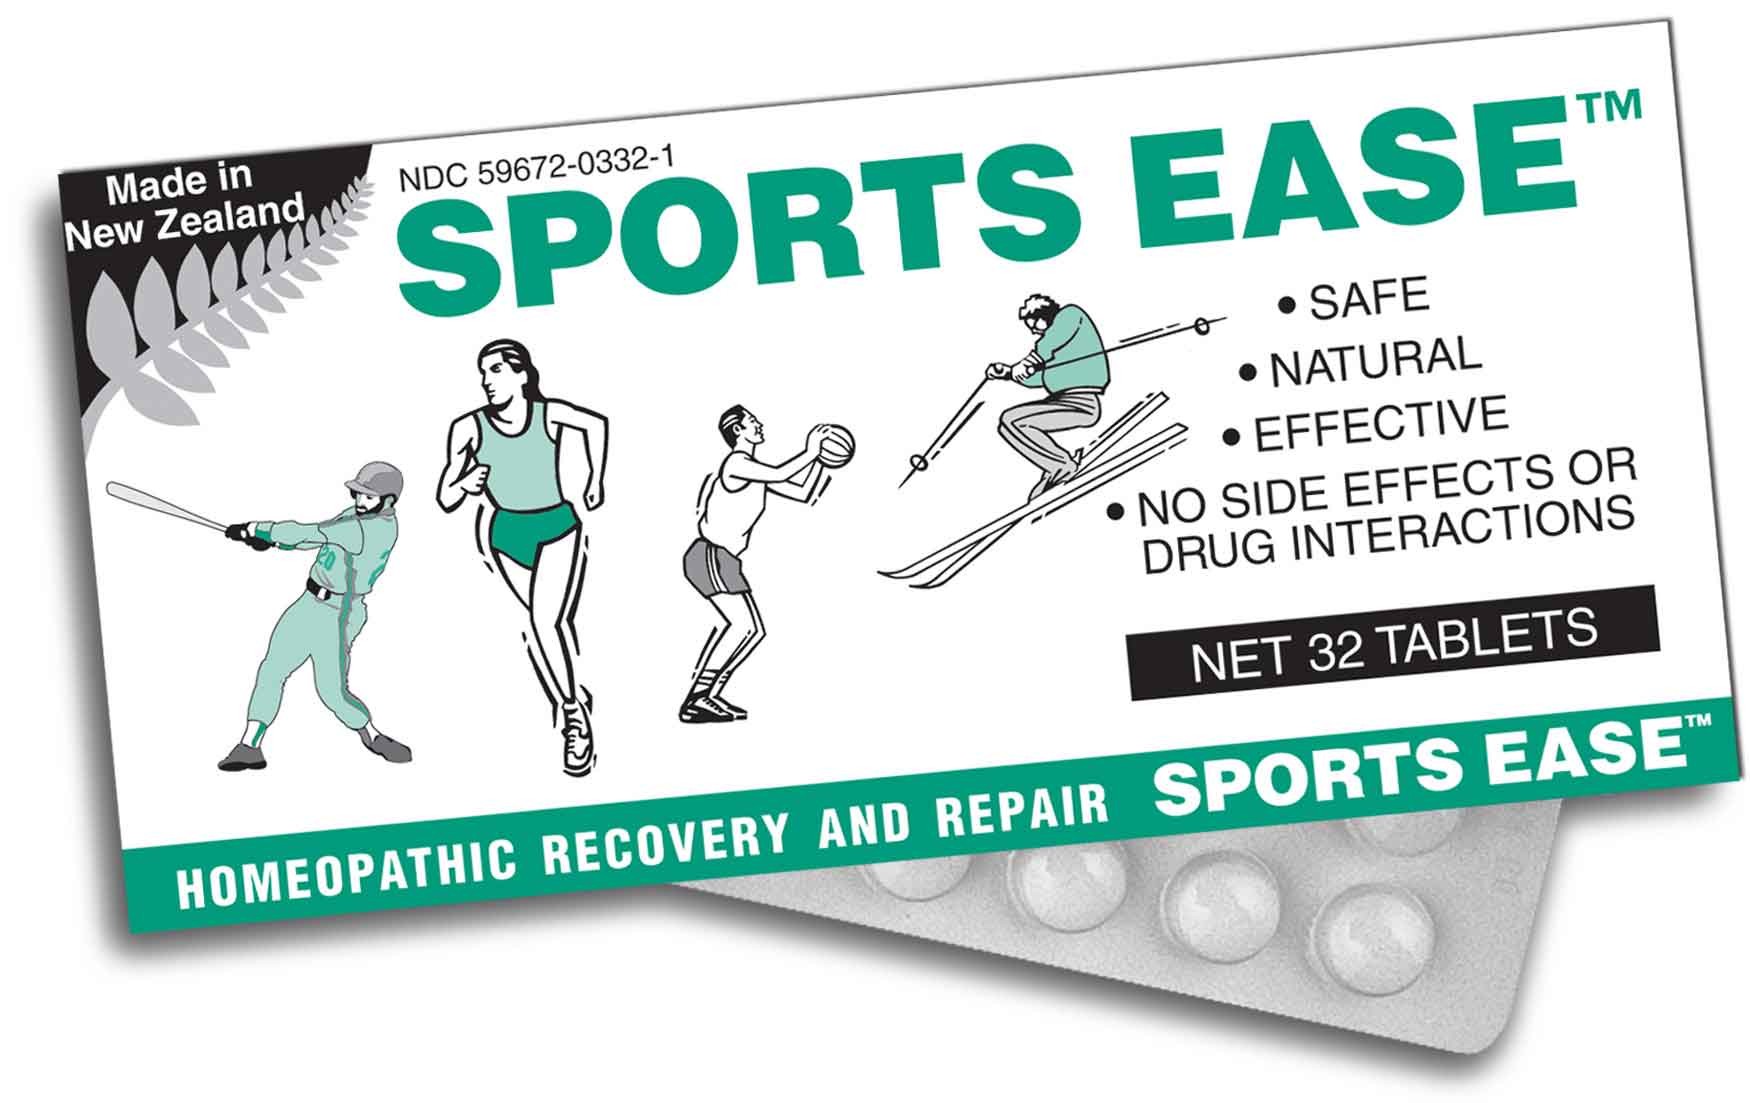 sports ease packet image